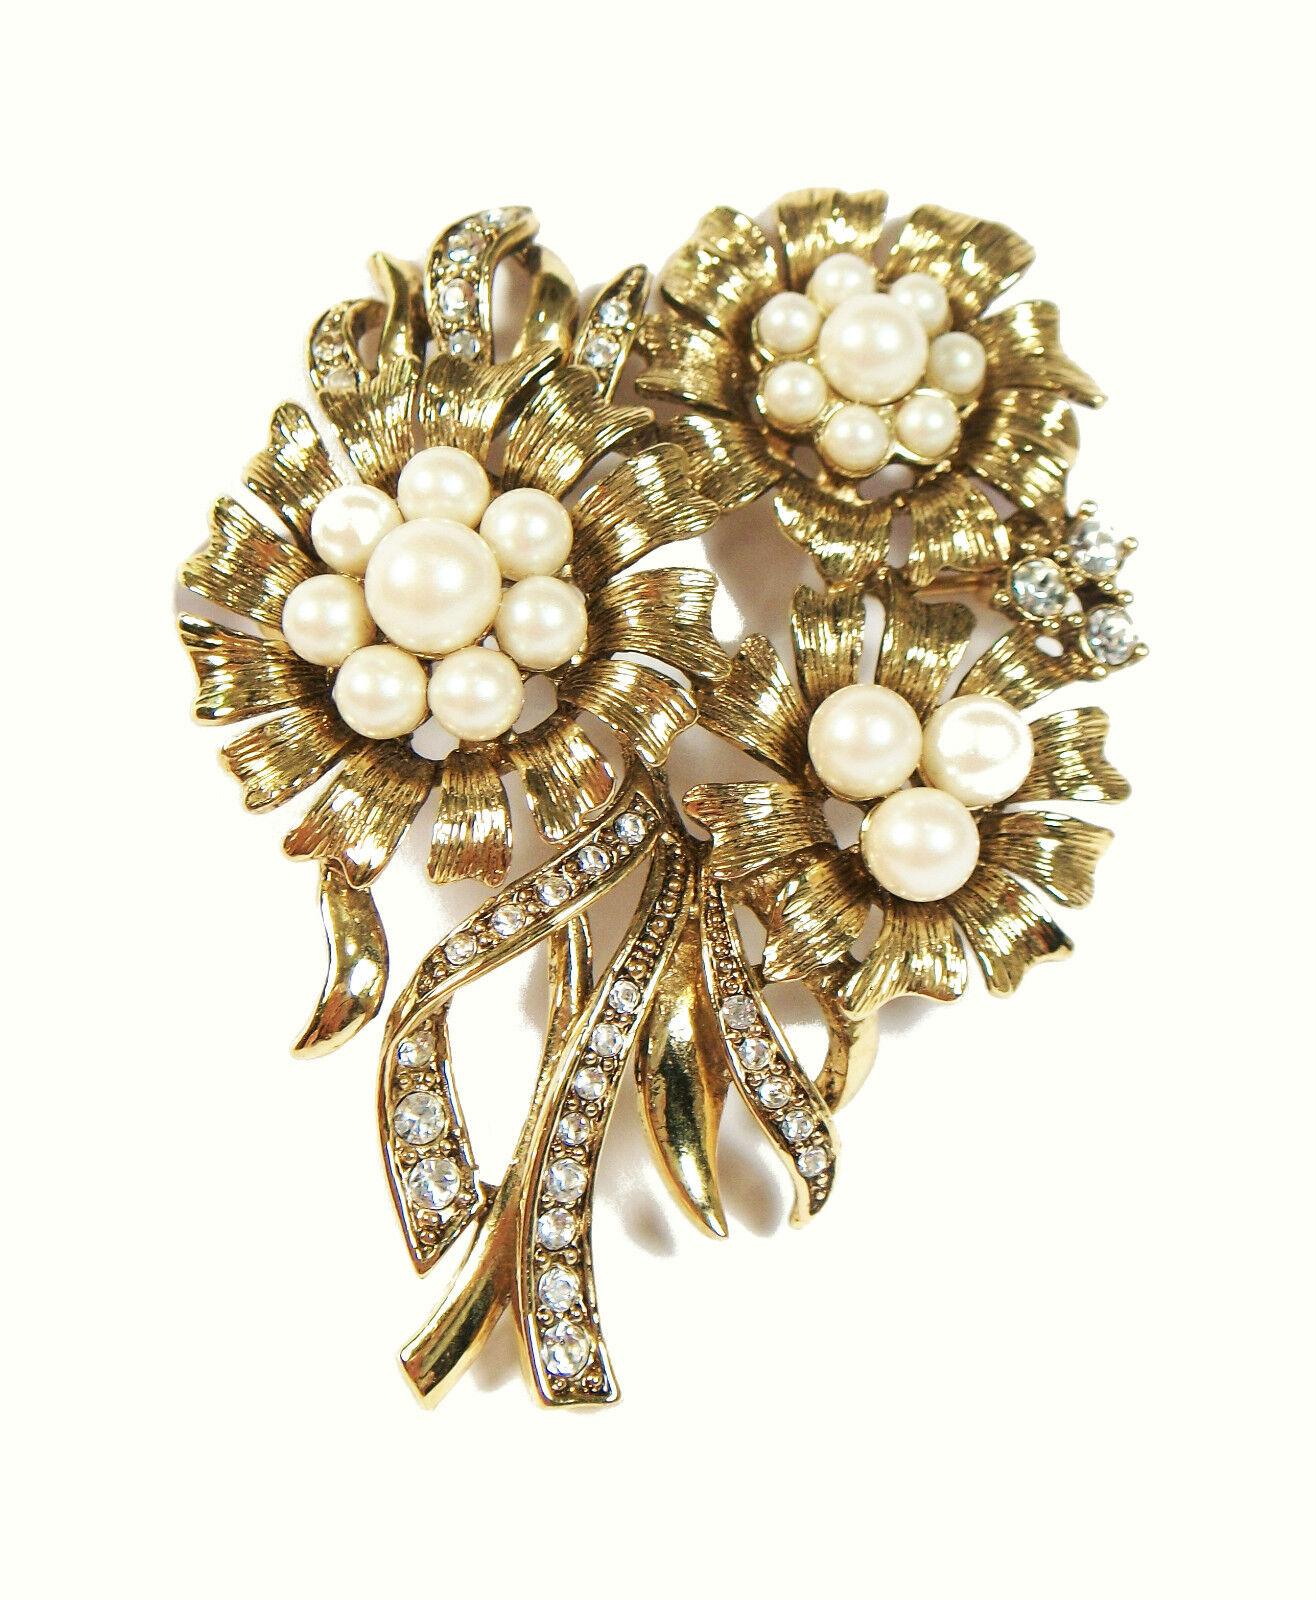 Round Cut MONET - Vintage Flower Brooch with Pearls & Rhinestones - Signed - Circa 1960's For Sale